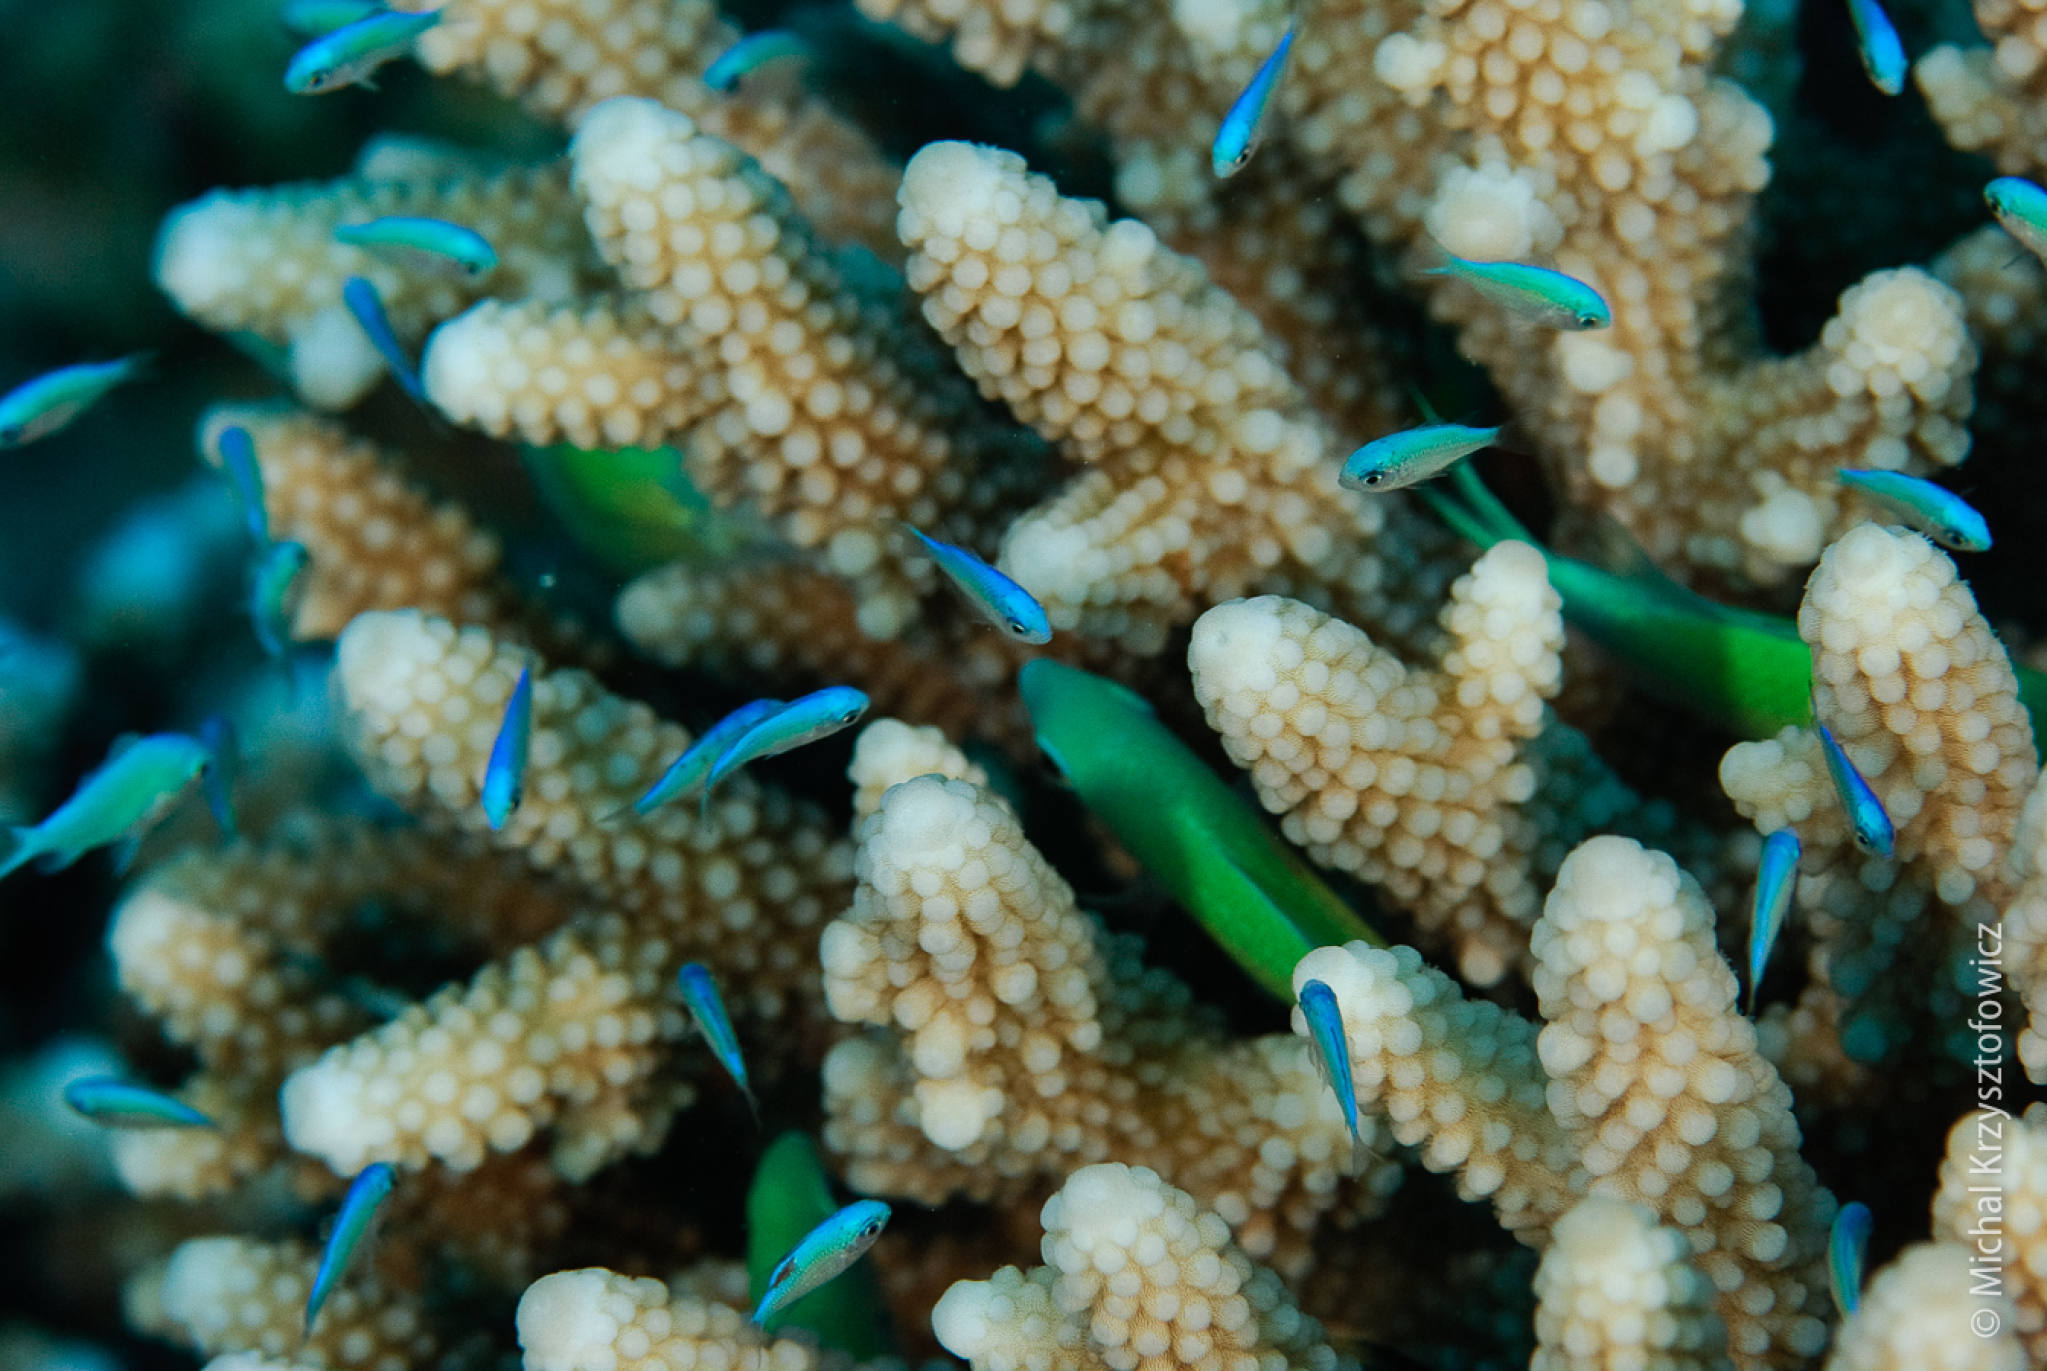 Fish in the coral